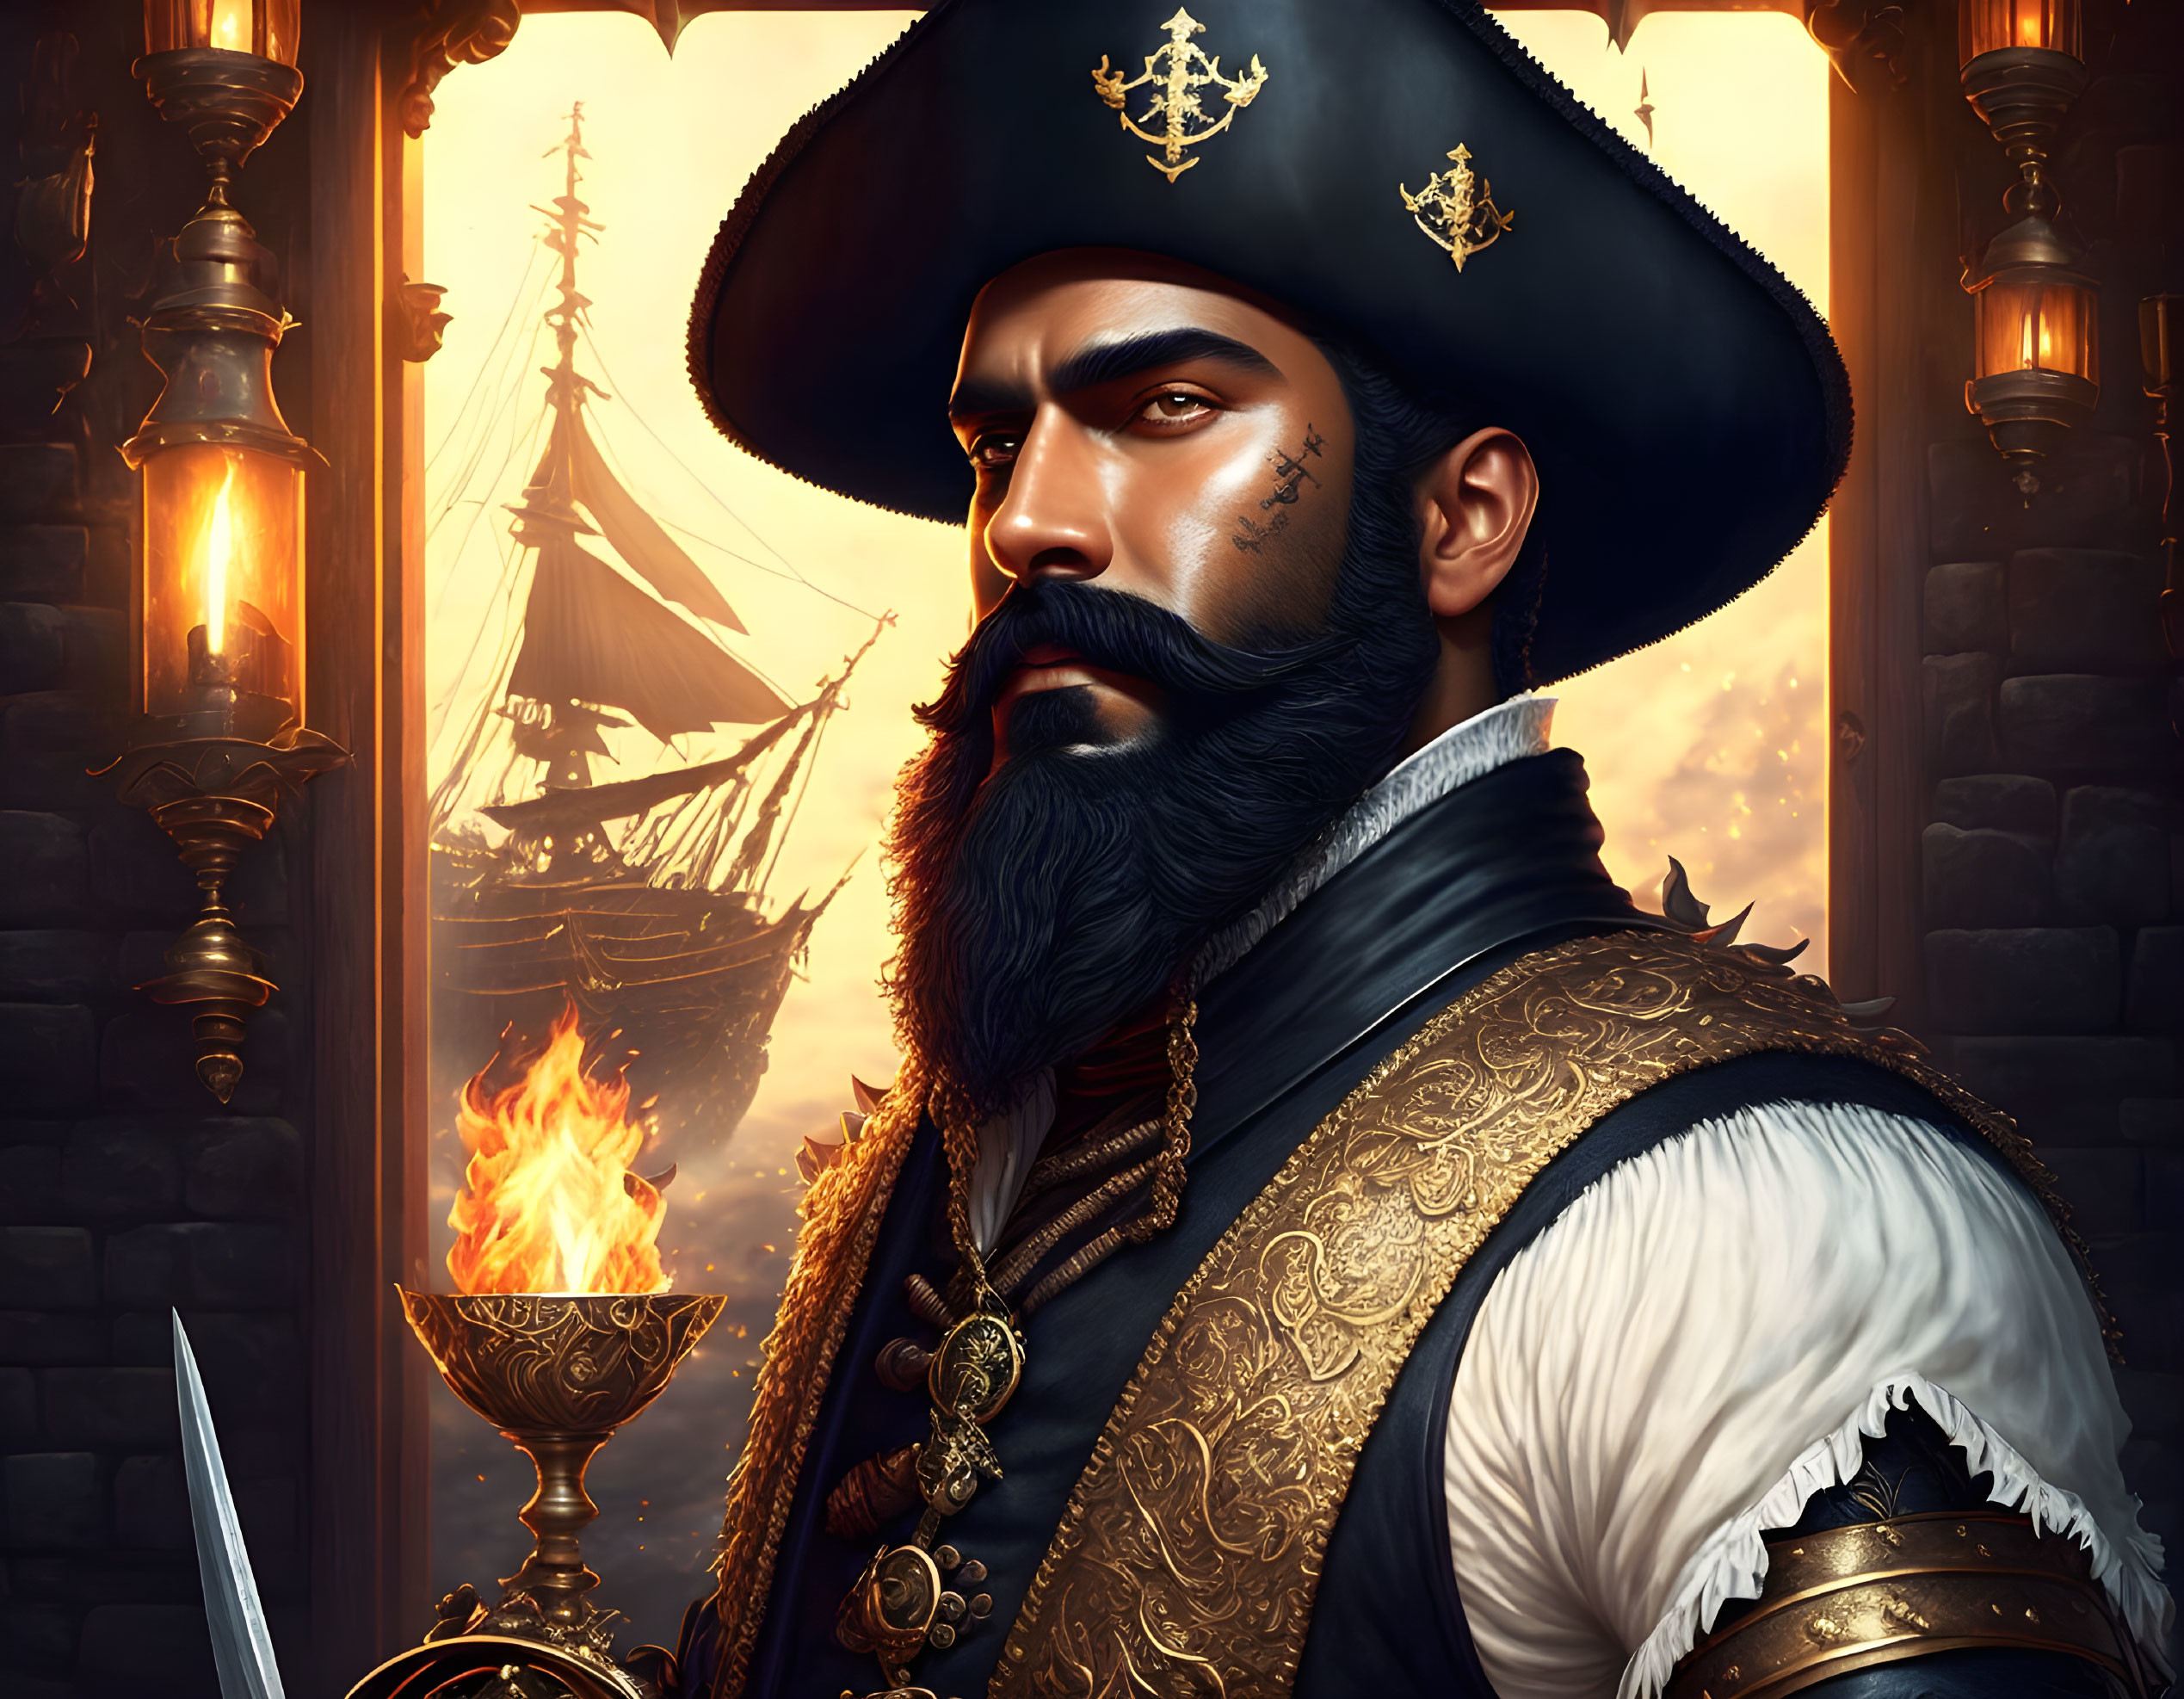 Illustrated pirate captain with beard and hat on ship deck with fiery torches